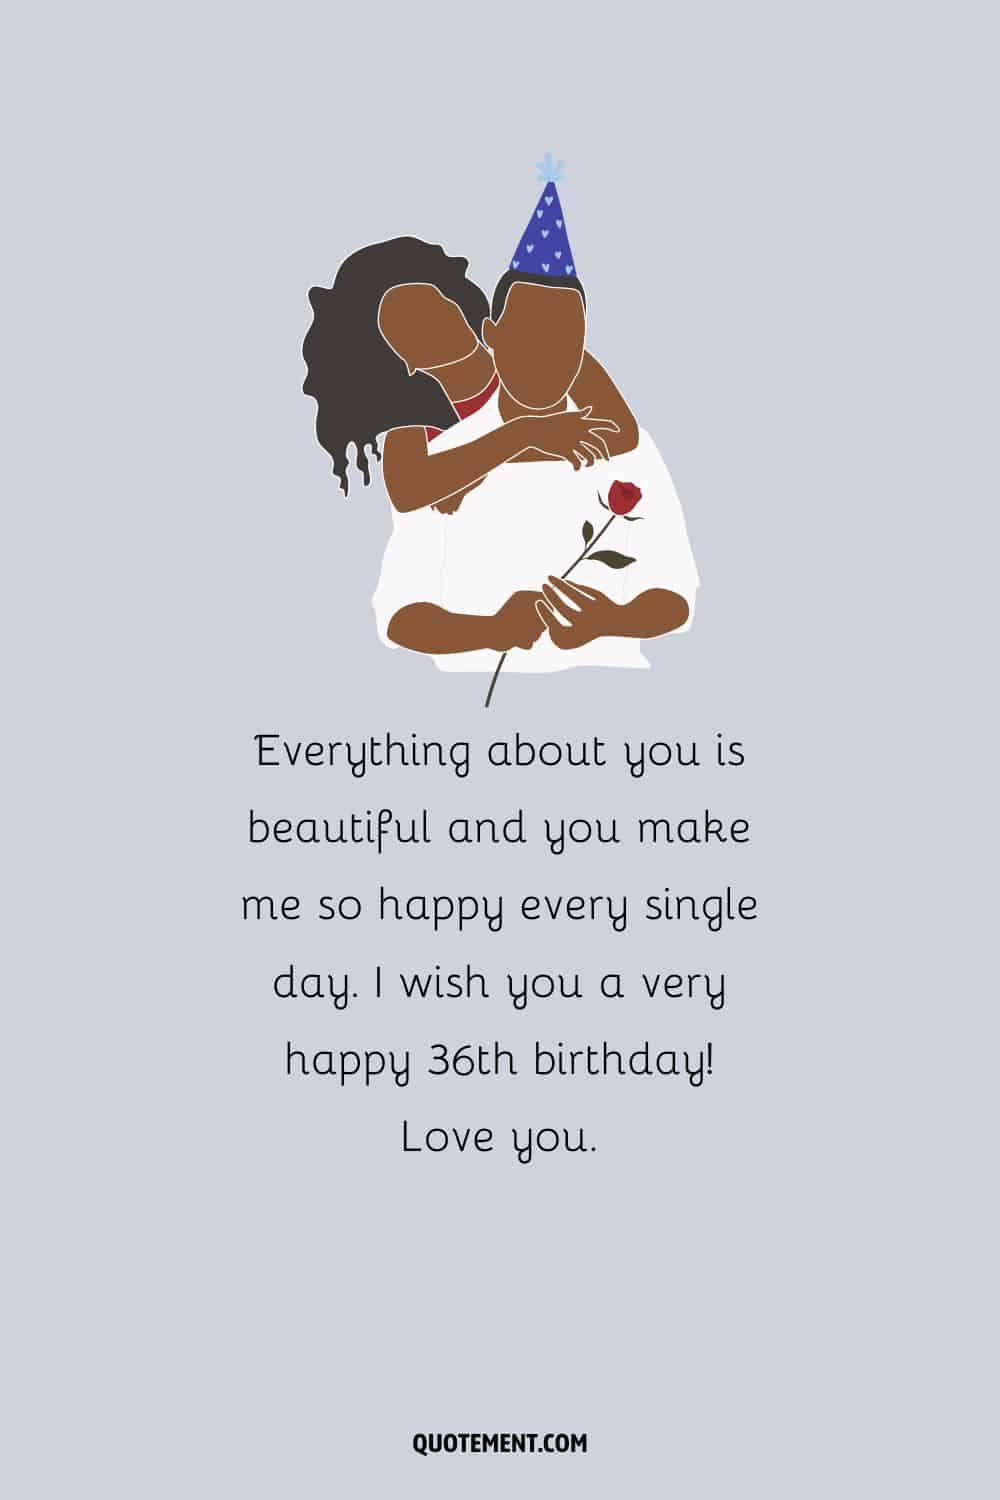 Illustration of a couple representing birthday wish for a husband or boyfriend.